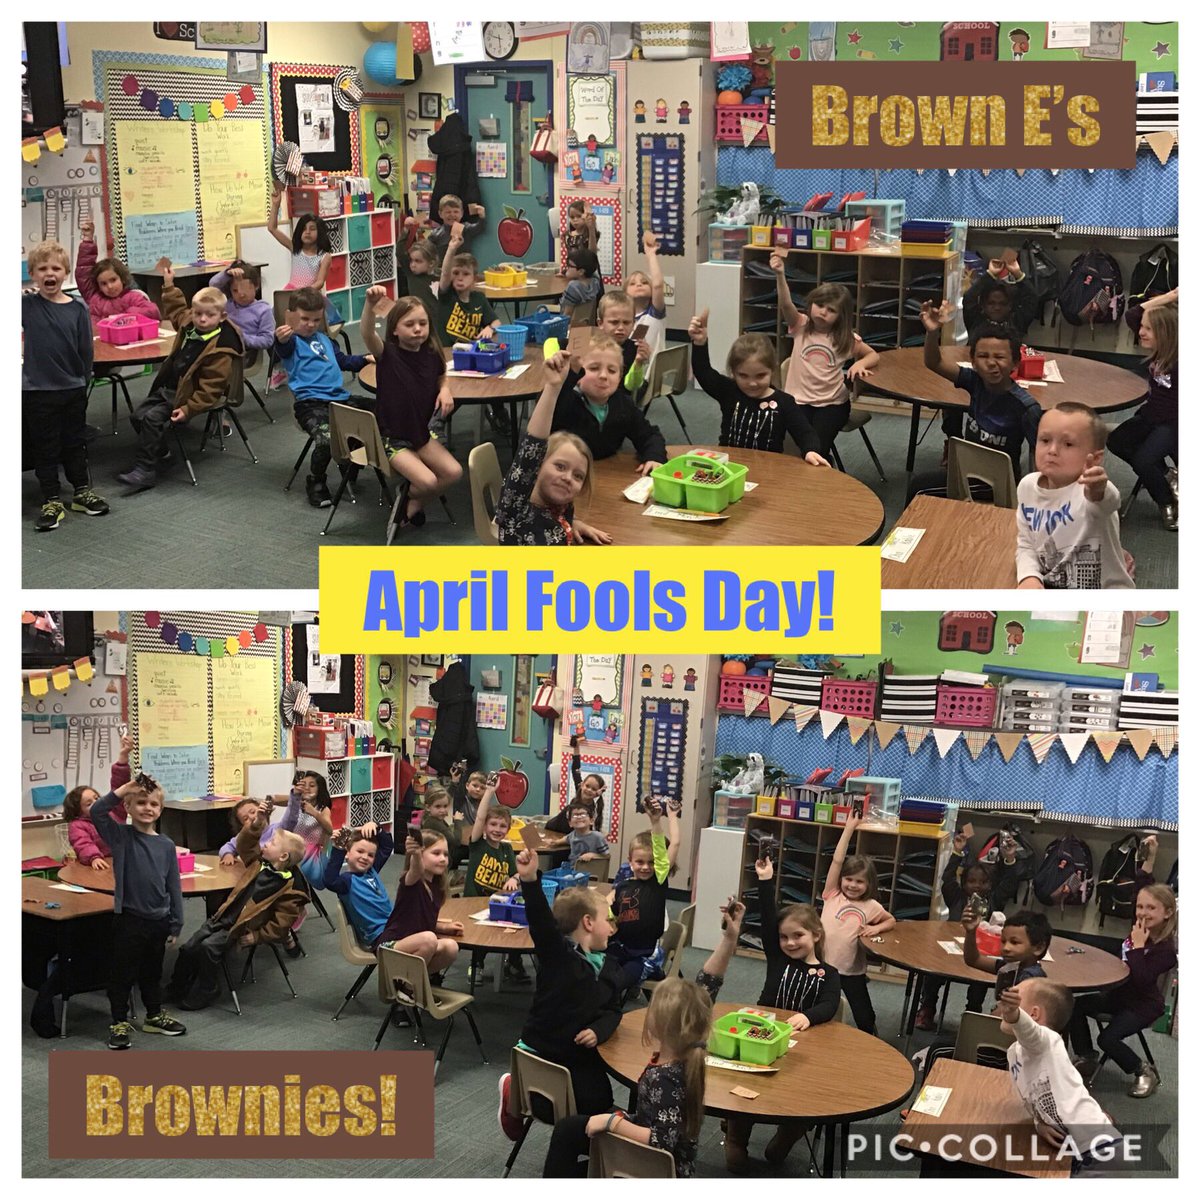 They all fell for it! They were excited for “Brown E’s” but more excited for “Brownies” 🤣#ThisIsMidway #ThisIsSBE